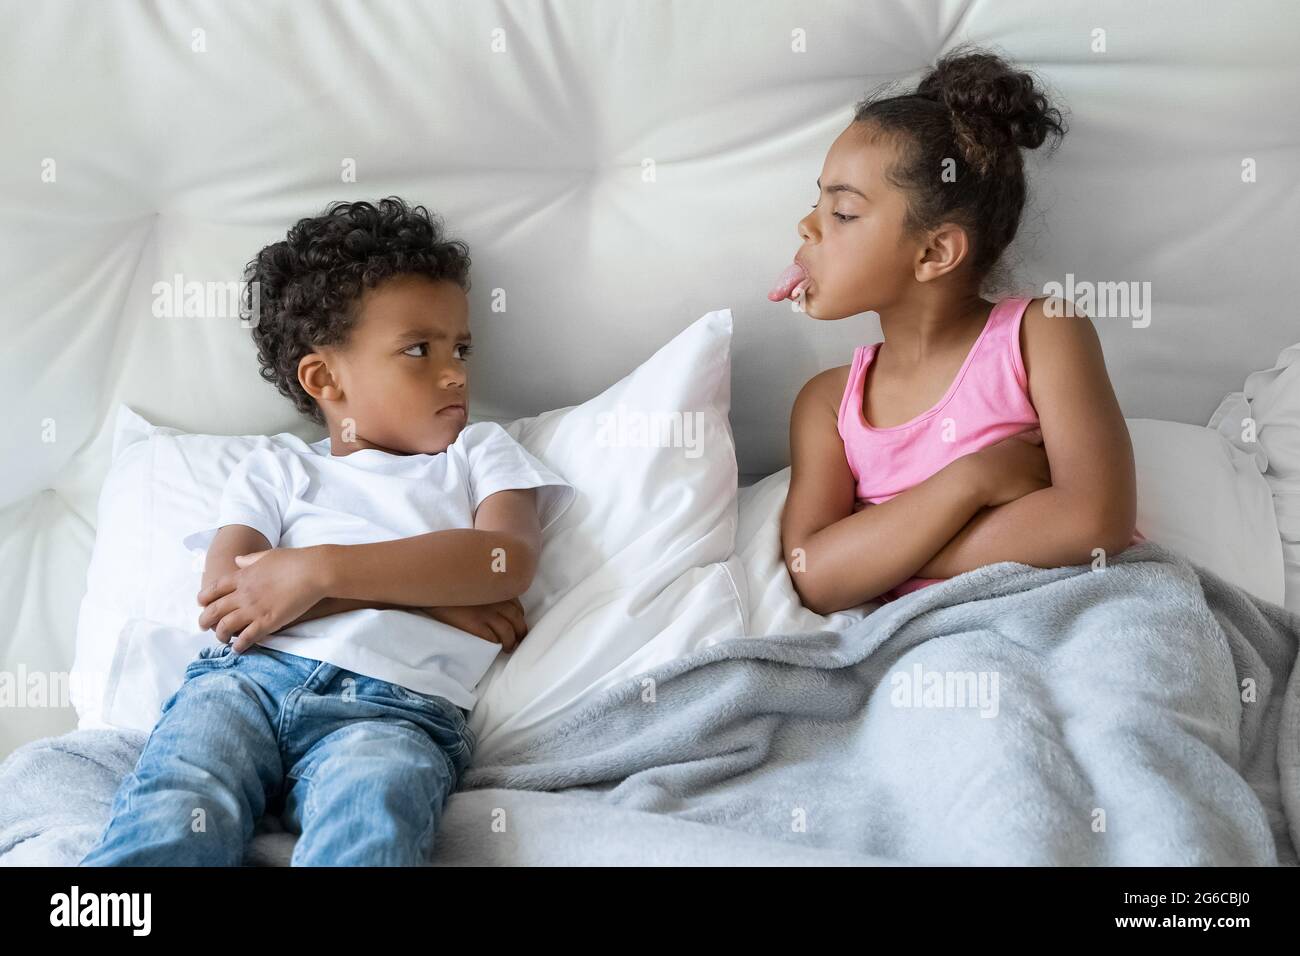 African American sister and brother little children quarreling lying in bed Stock Photo